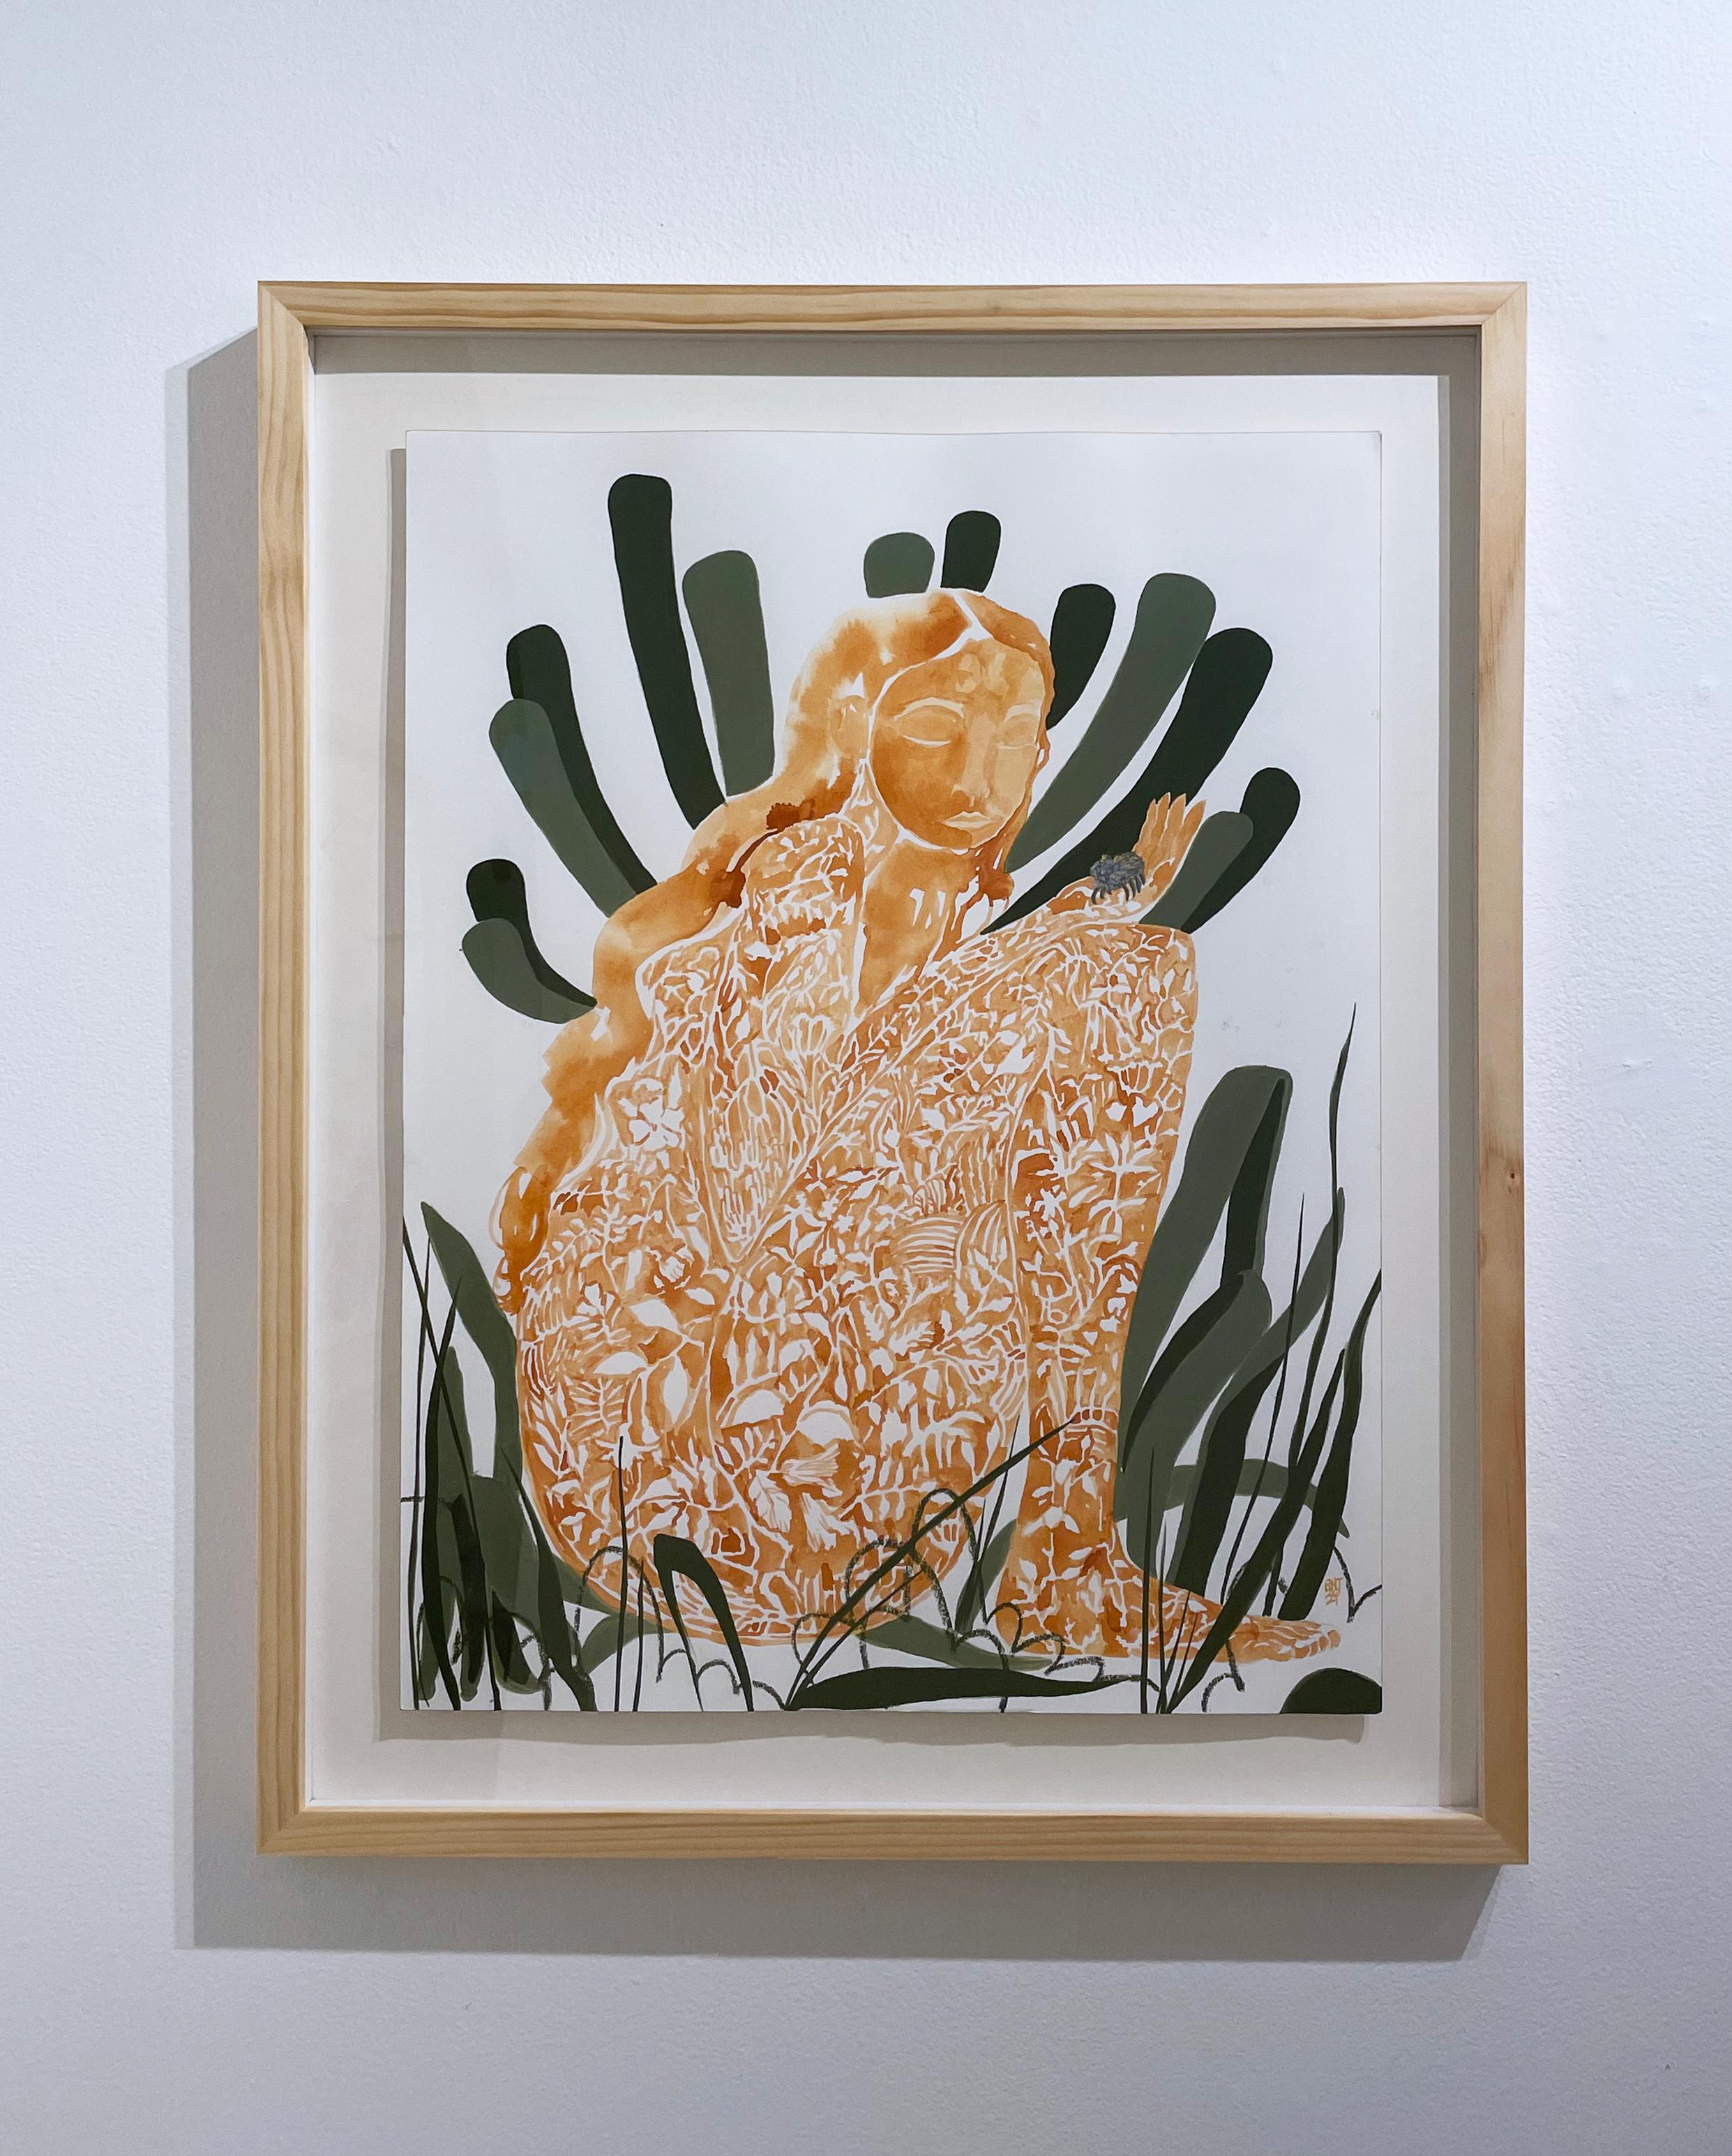 Watching Pulpo, 2021, female figure, cactus, earth tones, sienna, deep green - Painting by Rebecca Johnson